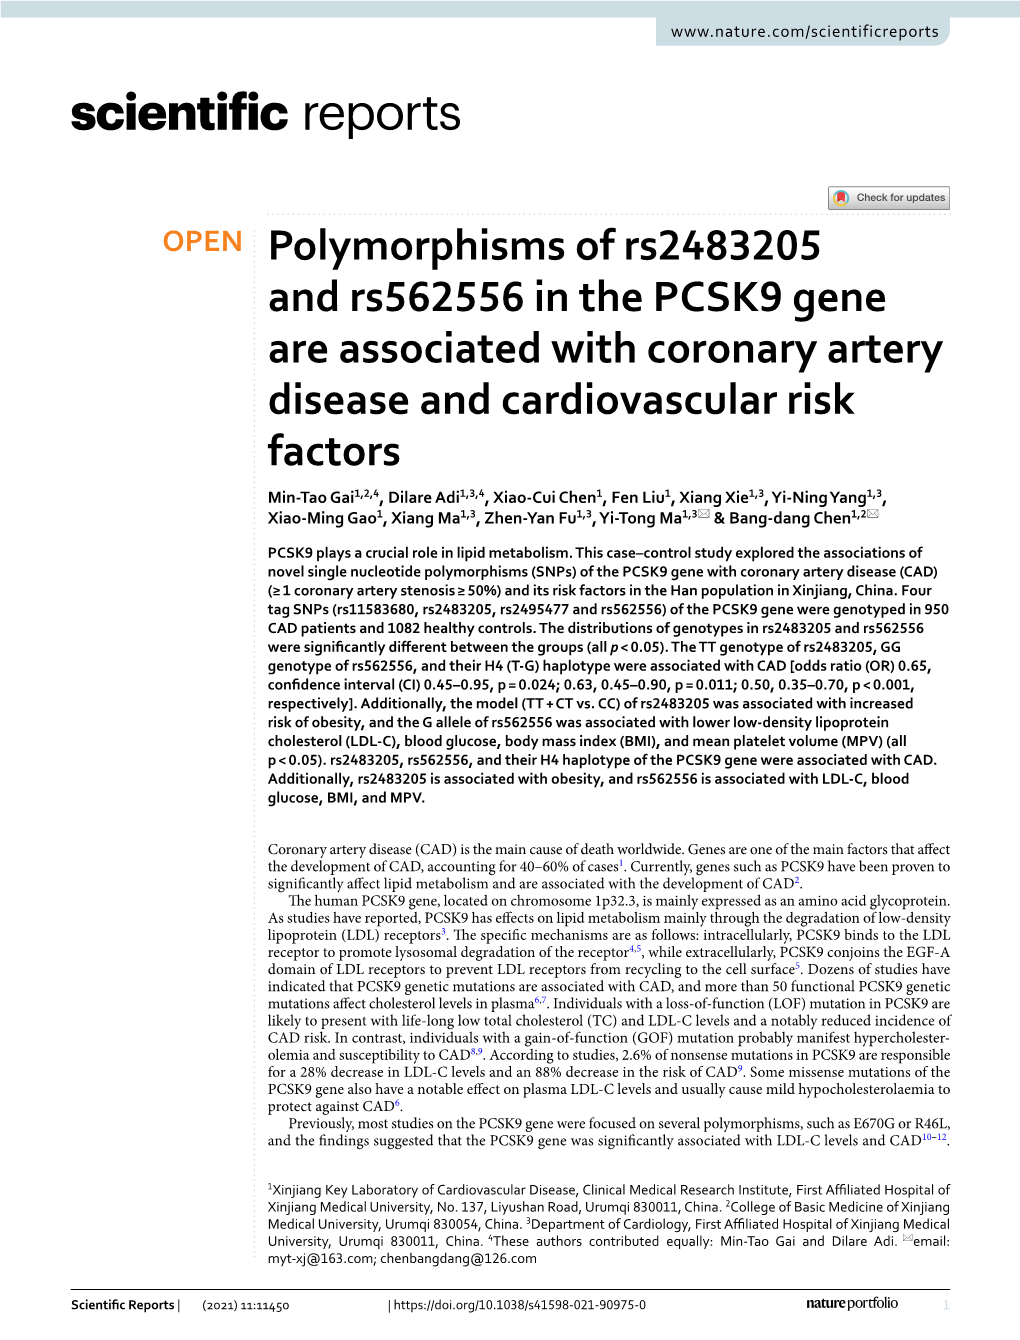 Polymorphisms of Rs2483205 and Rs562556 in the PCSK9 Gene Are